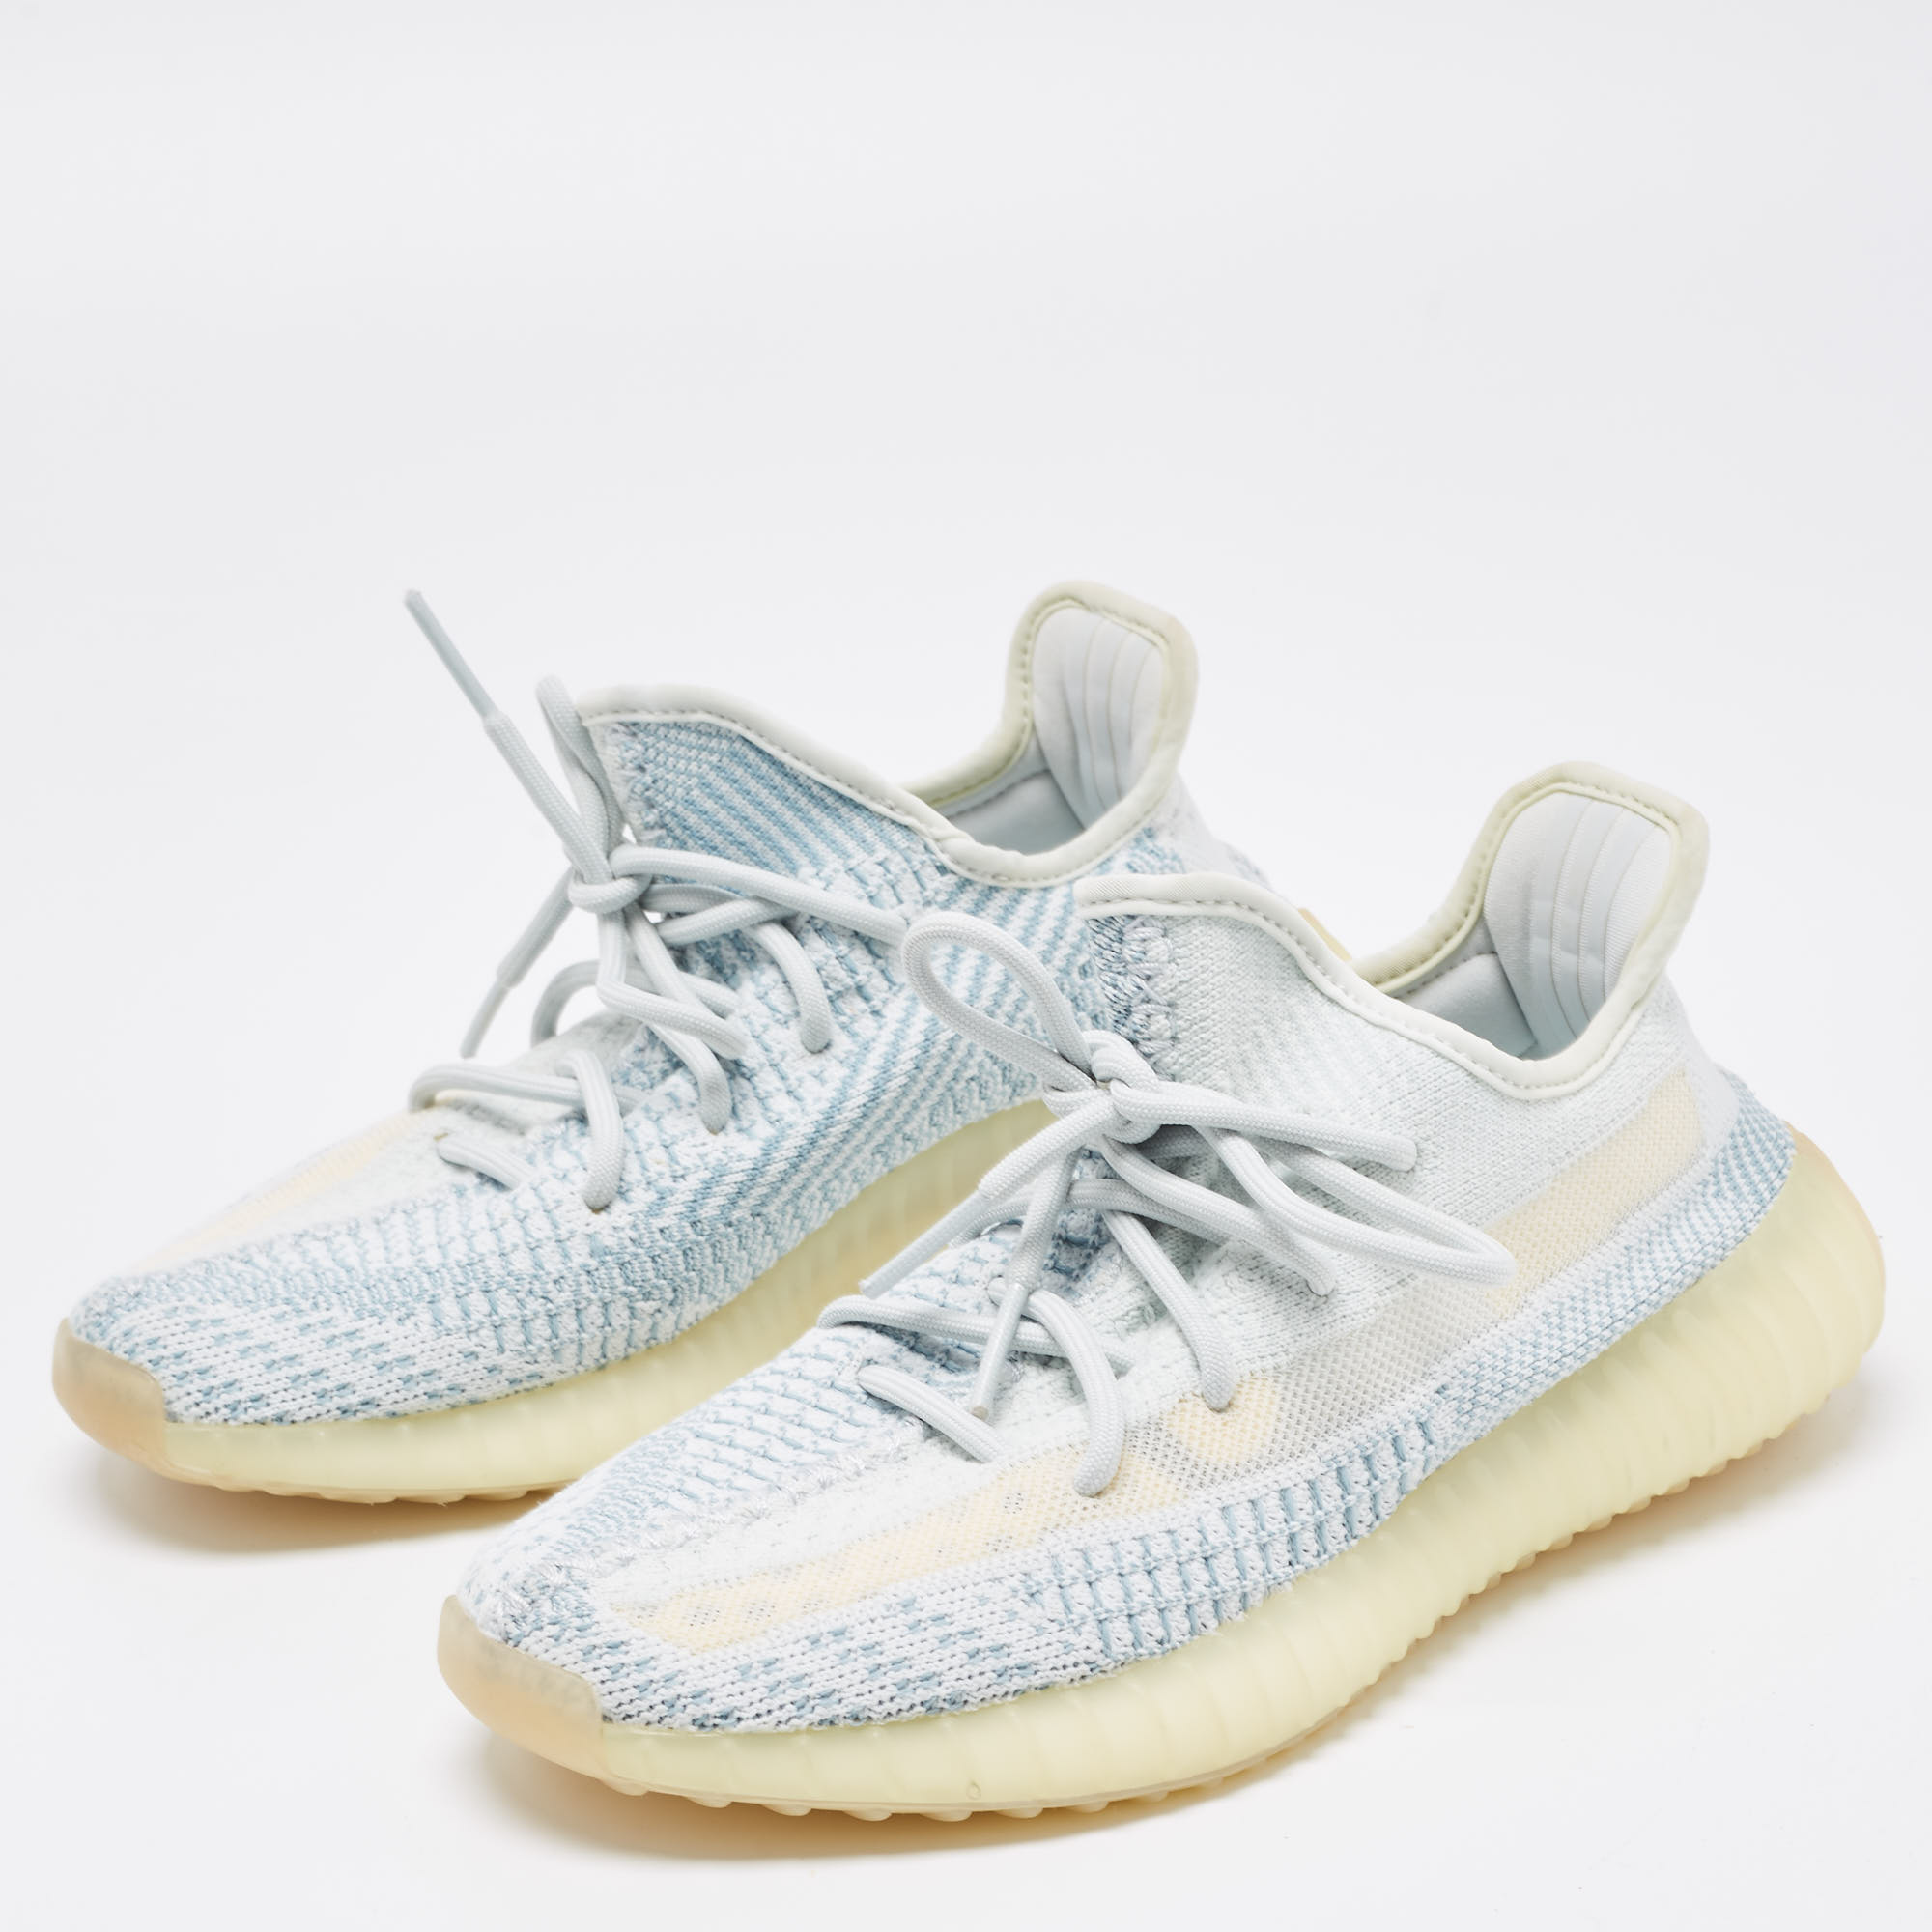 

Yeezy x Adidas Two Tone Knit Fabric Boost 350 V2 Cloud White Non Reflective Sneakers Size, Blue